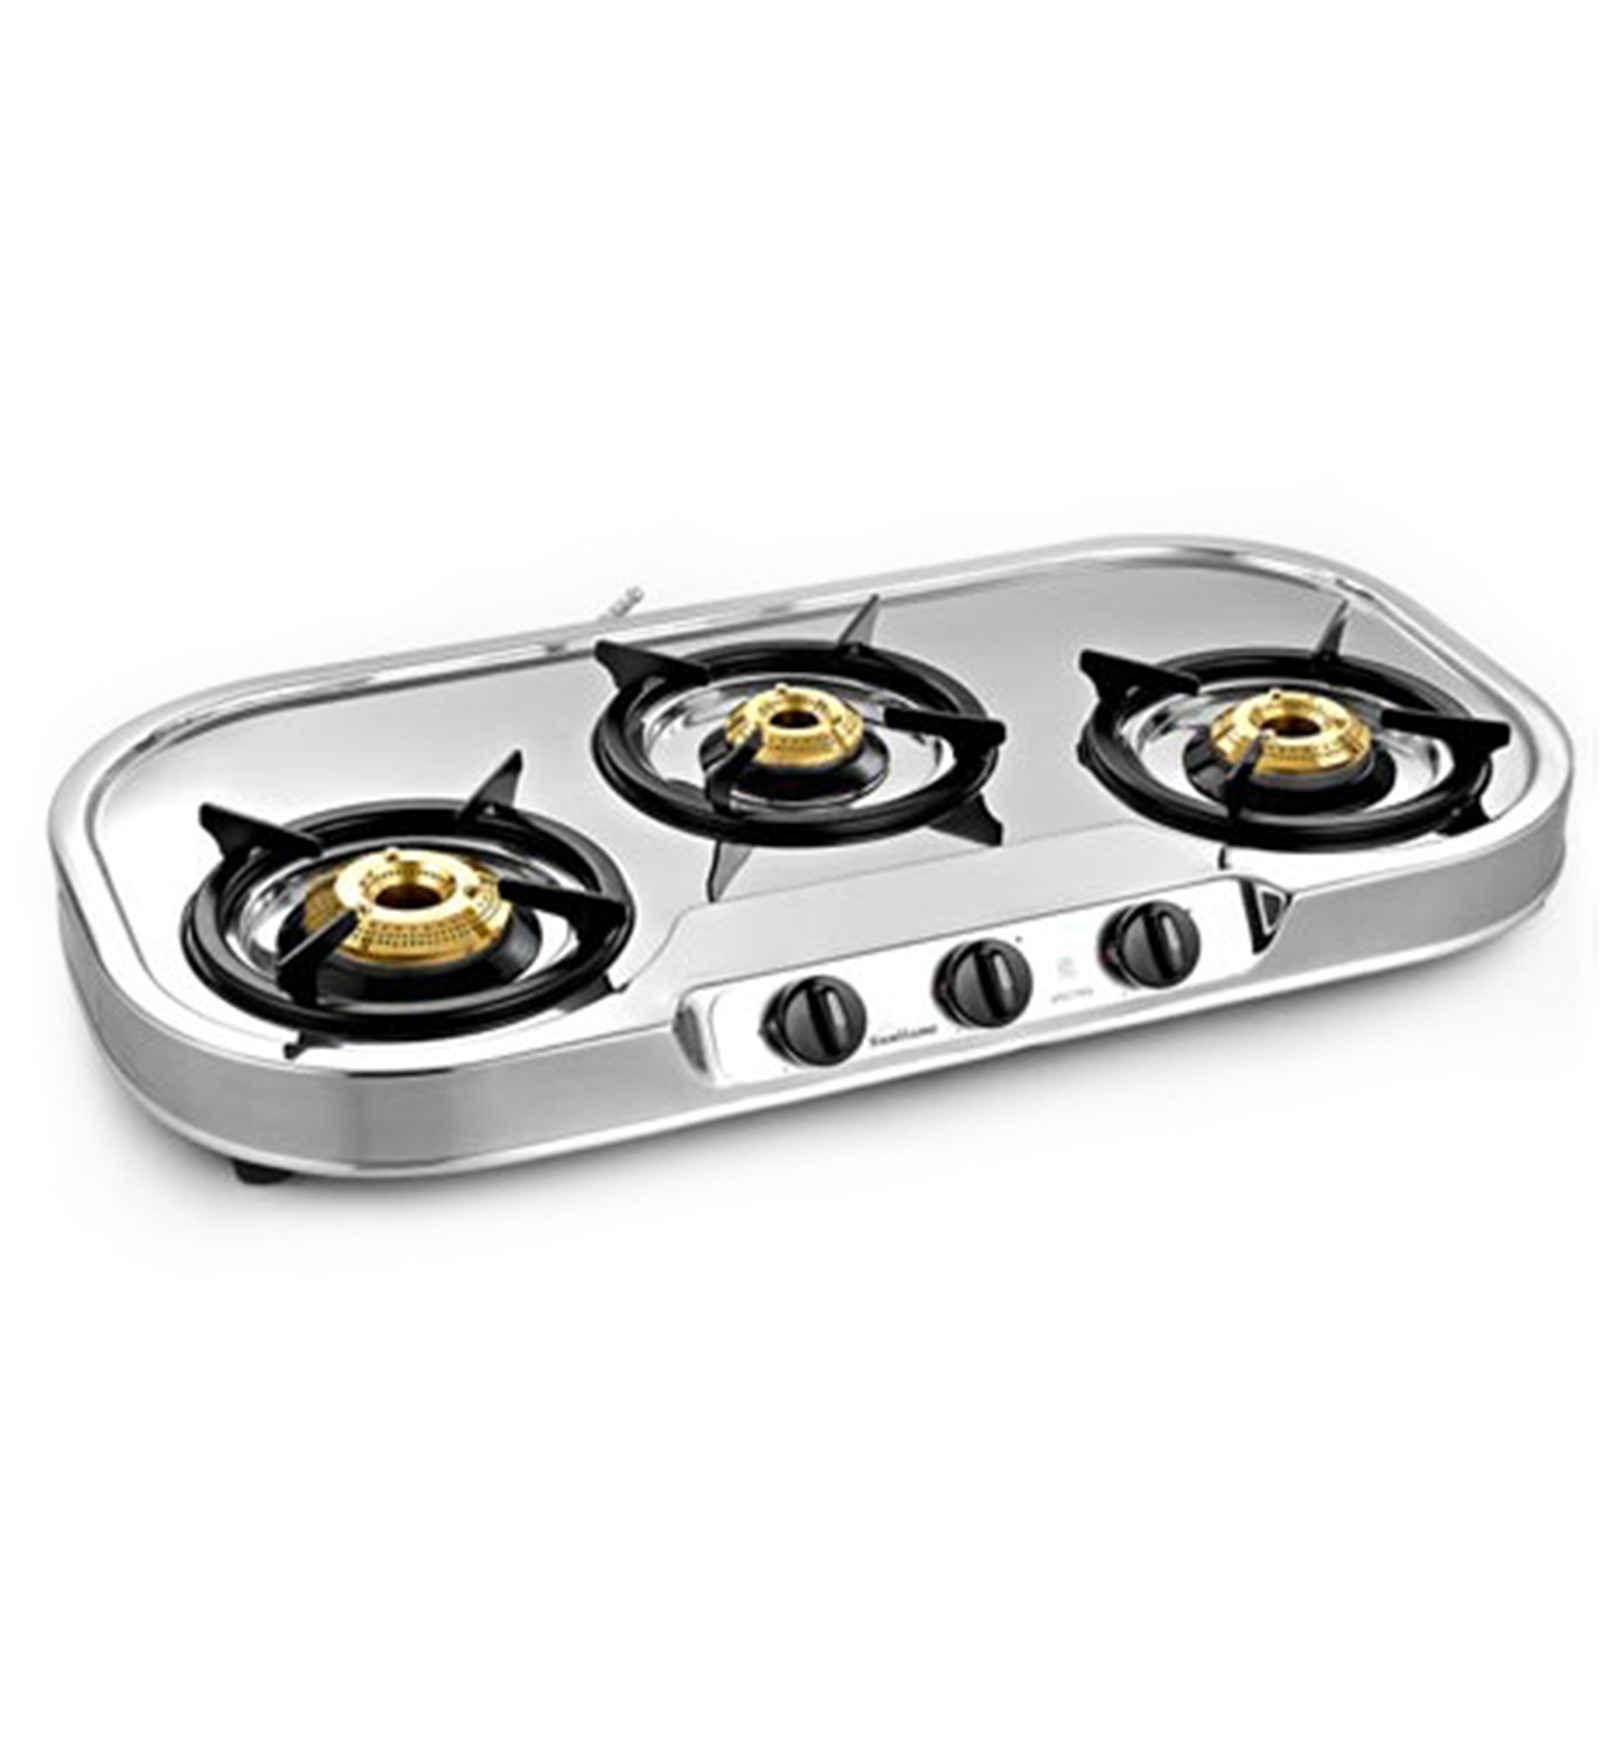 Sunflame Spectra Stainless Steel 3-burner Auto Ignition Cooktop